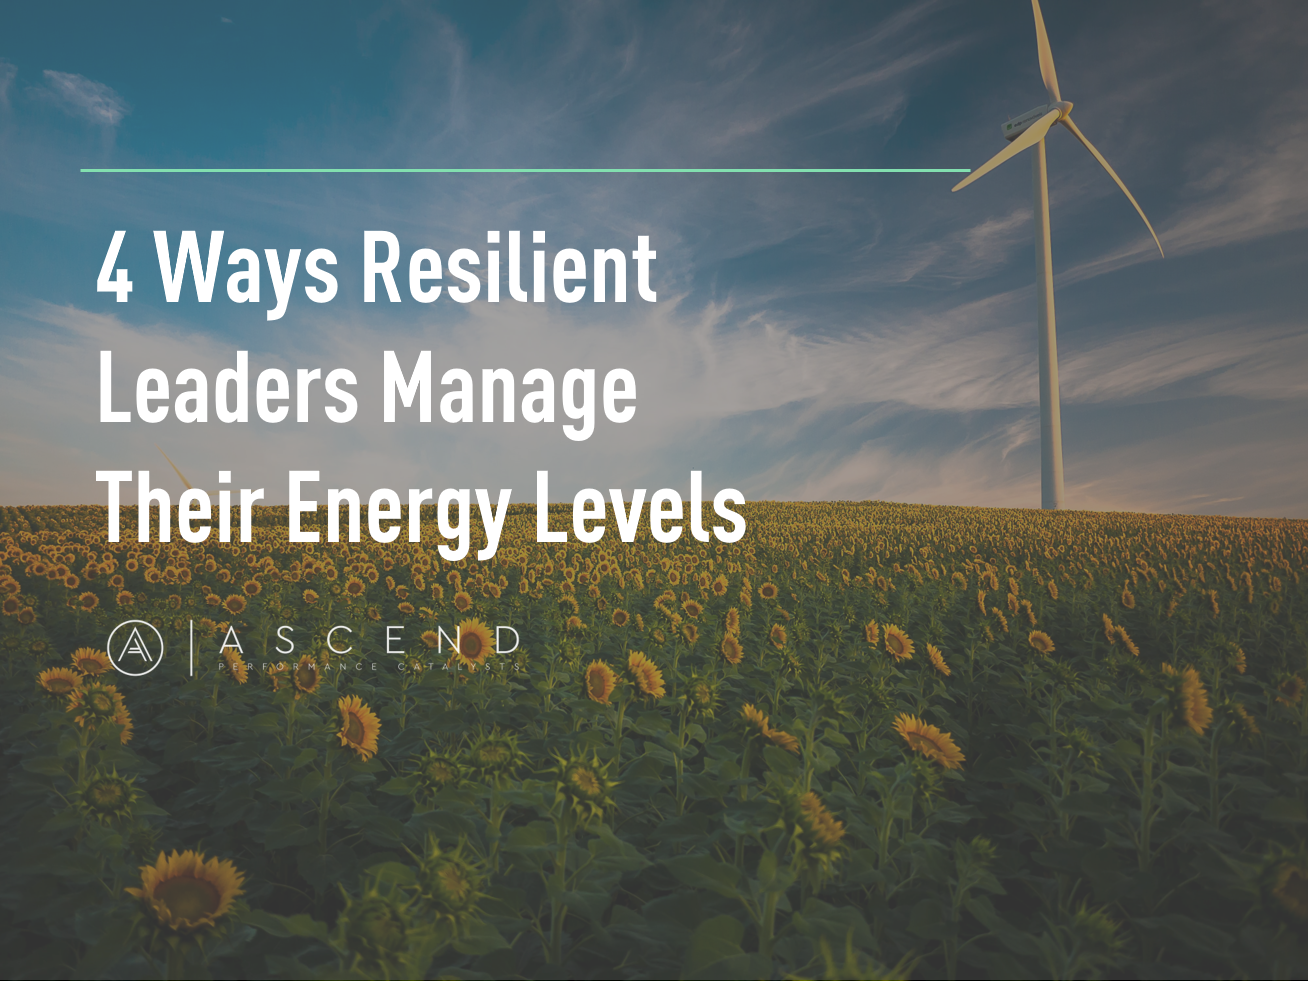 4 ways resilient leaders manage their energy levels